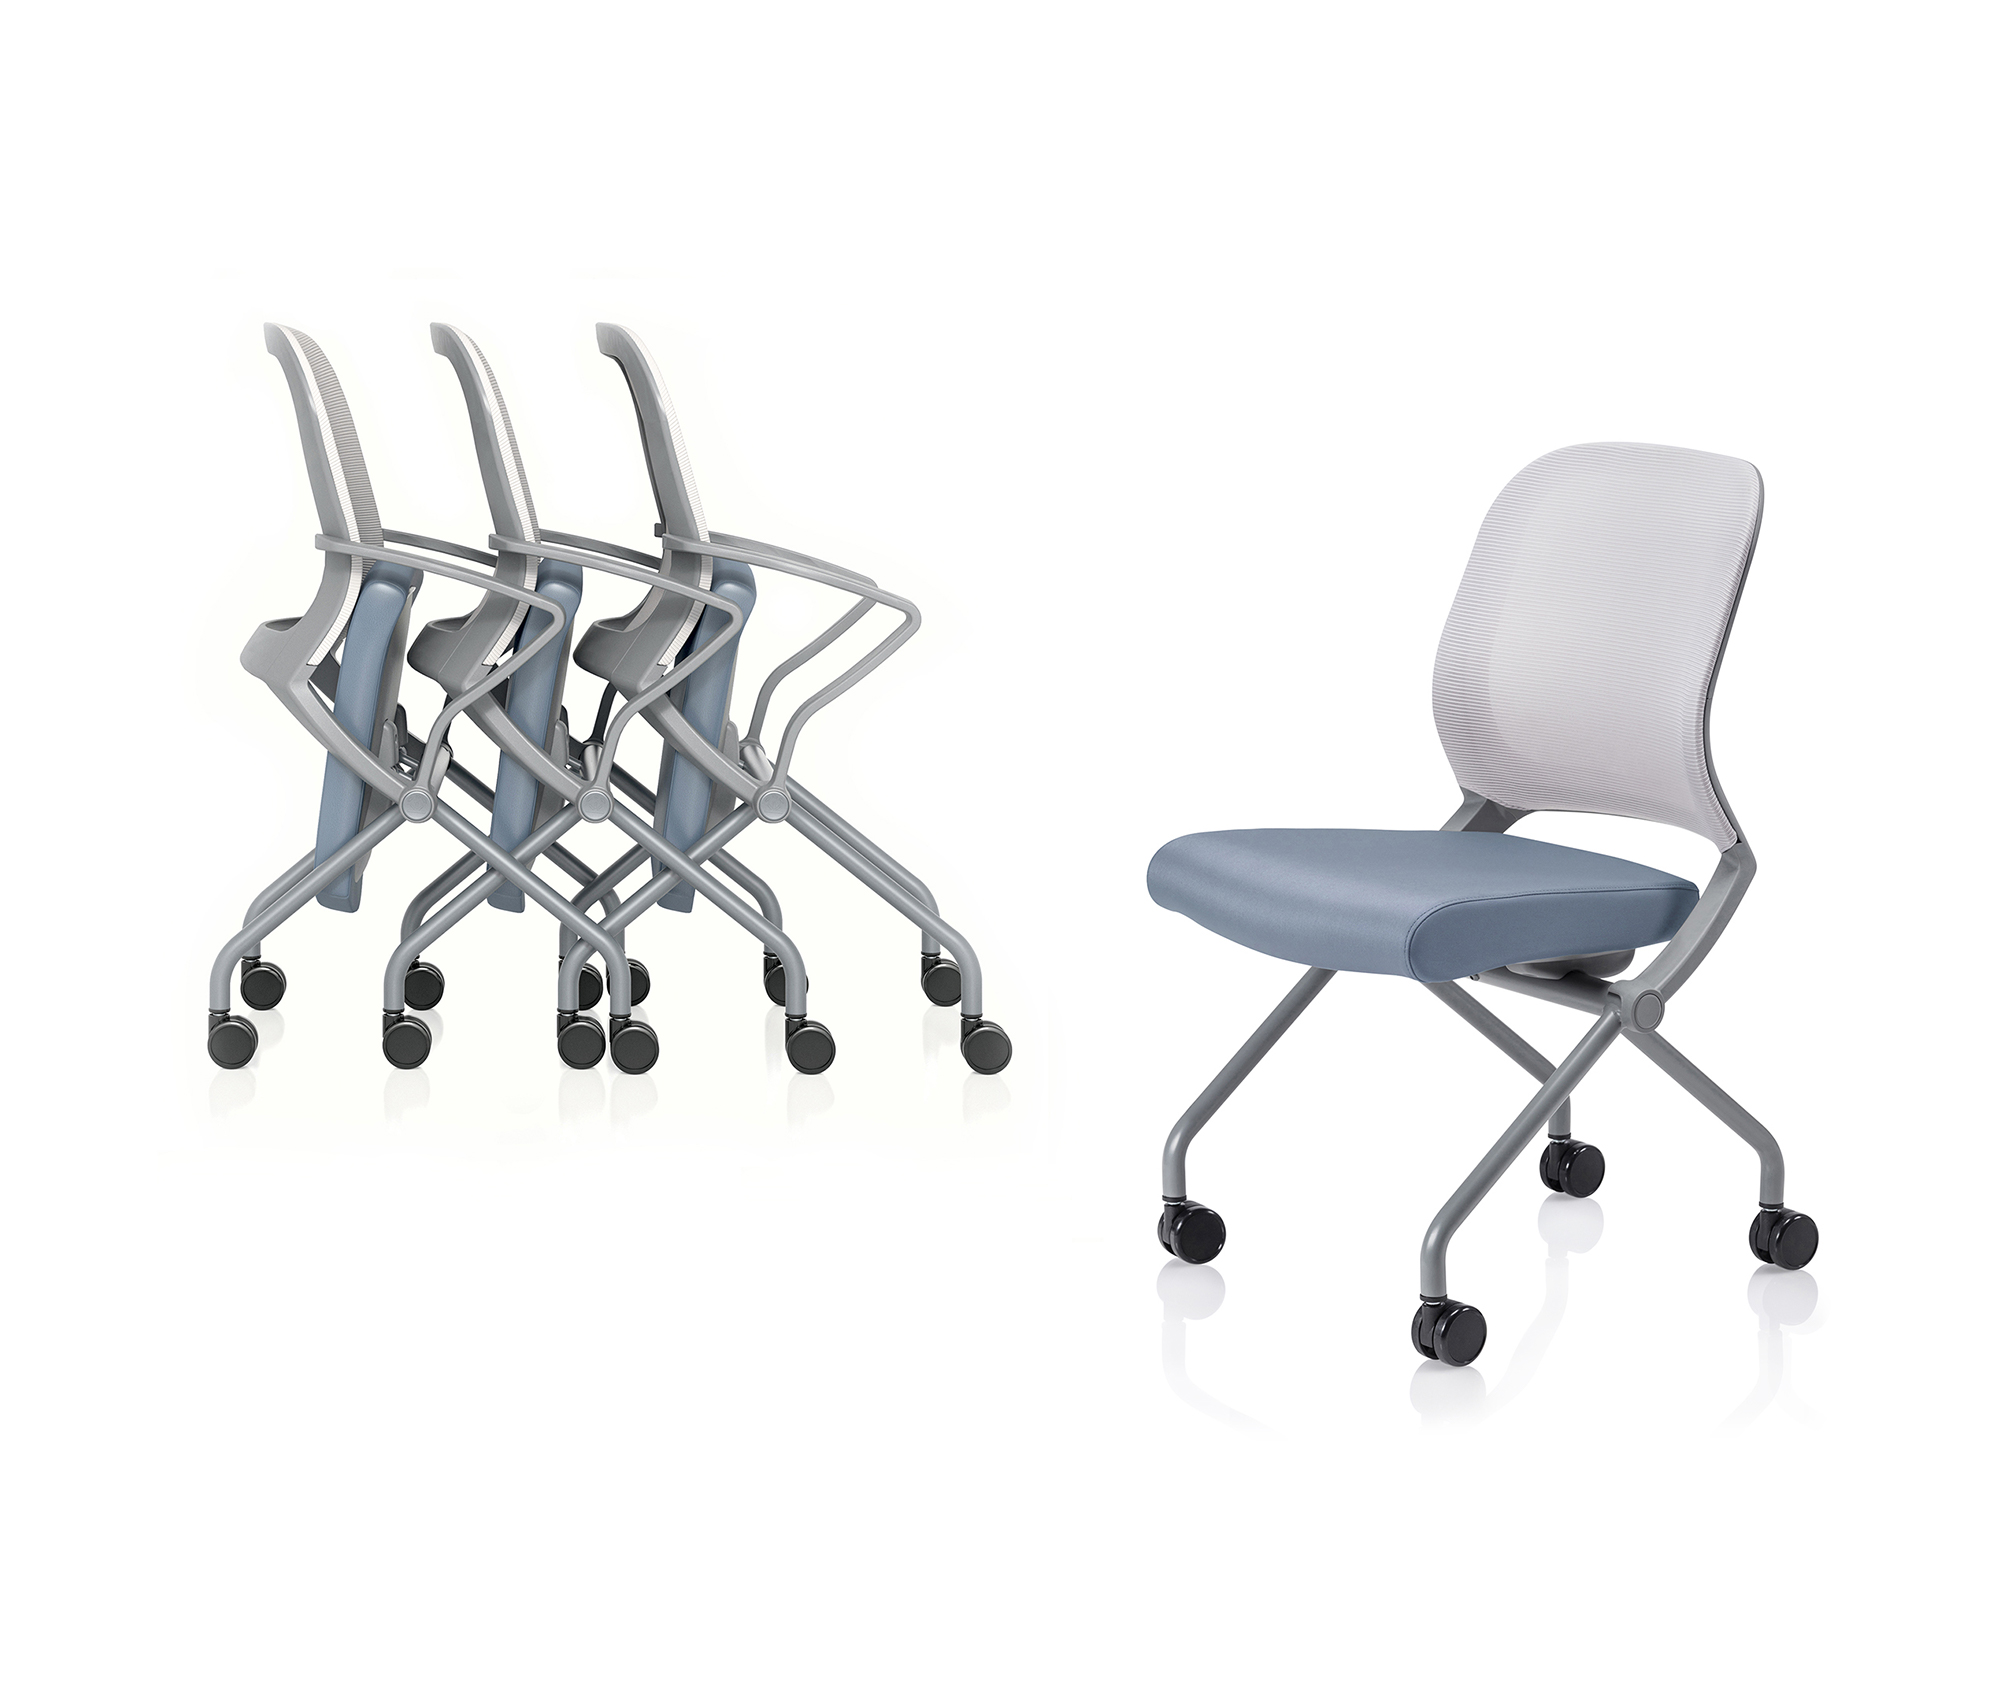 Groupe-Lacasse_RACKUP-Seating-1_int_products